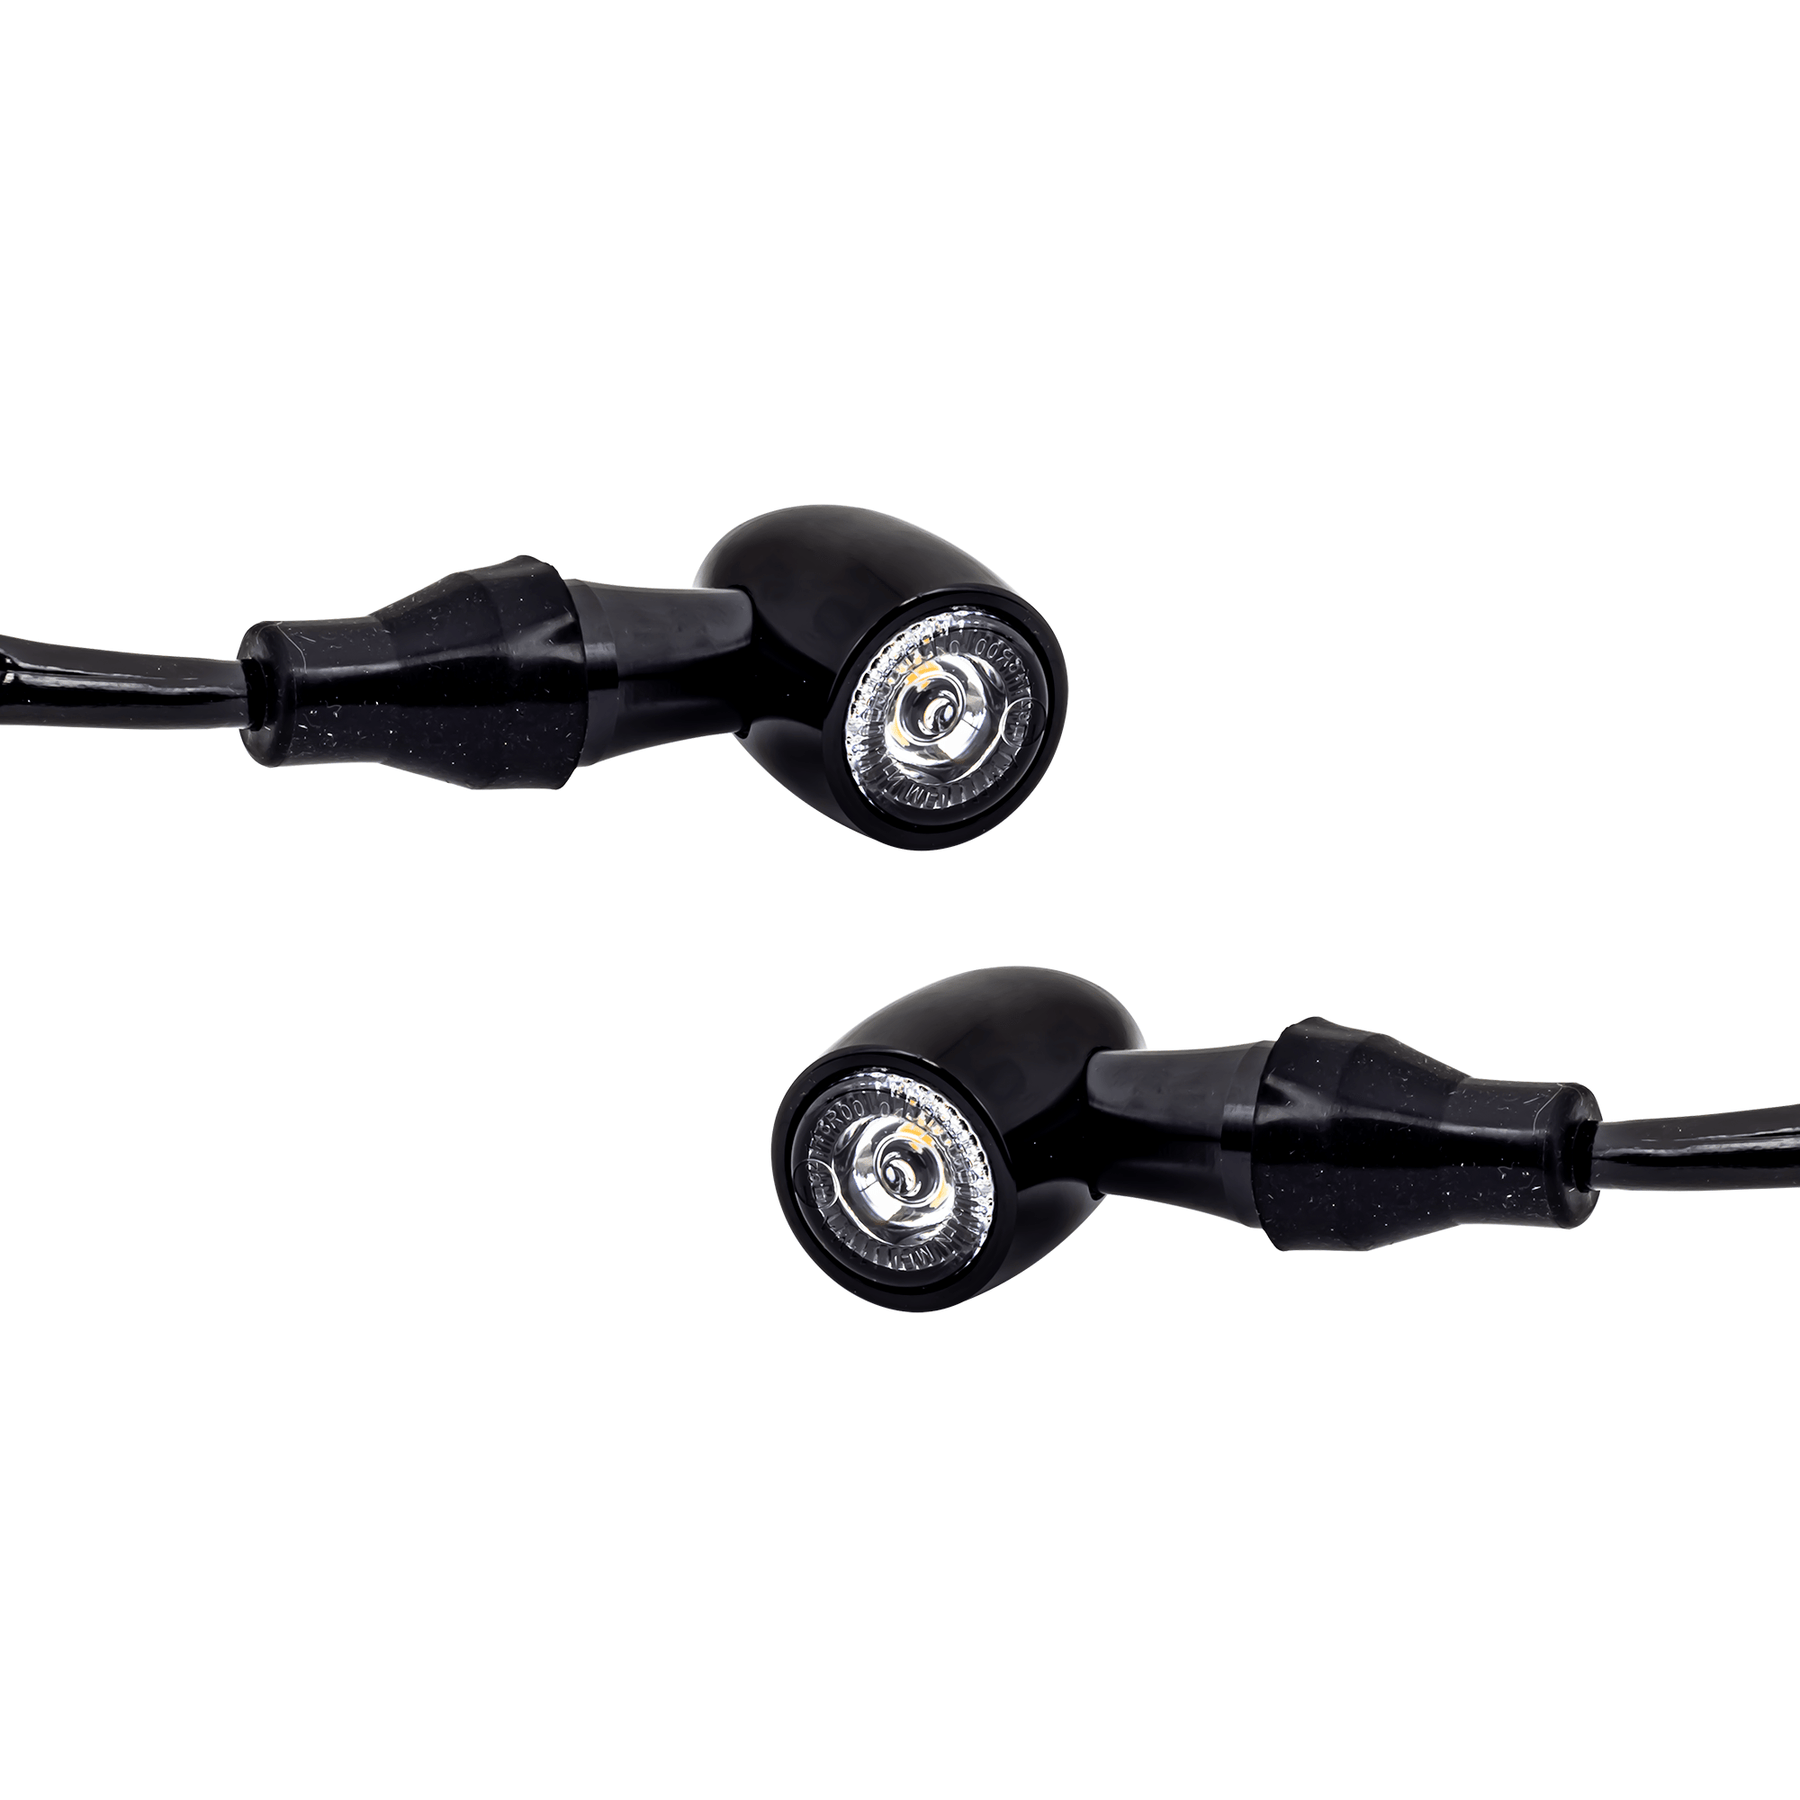 Eagle Lights BULLETBEAM Front LED Turn Signals with Rear LED Brake / Turn Signal and Running Light Kit